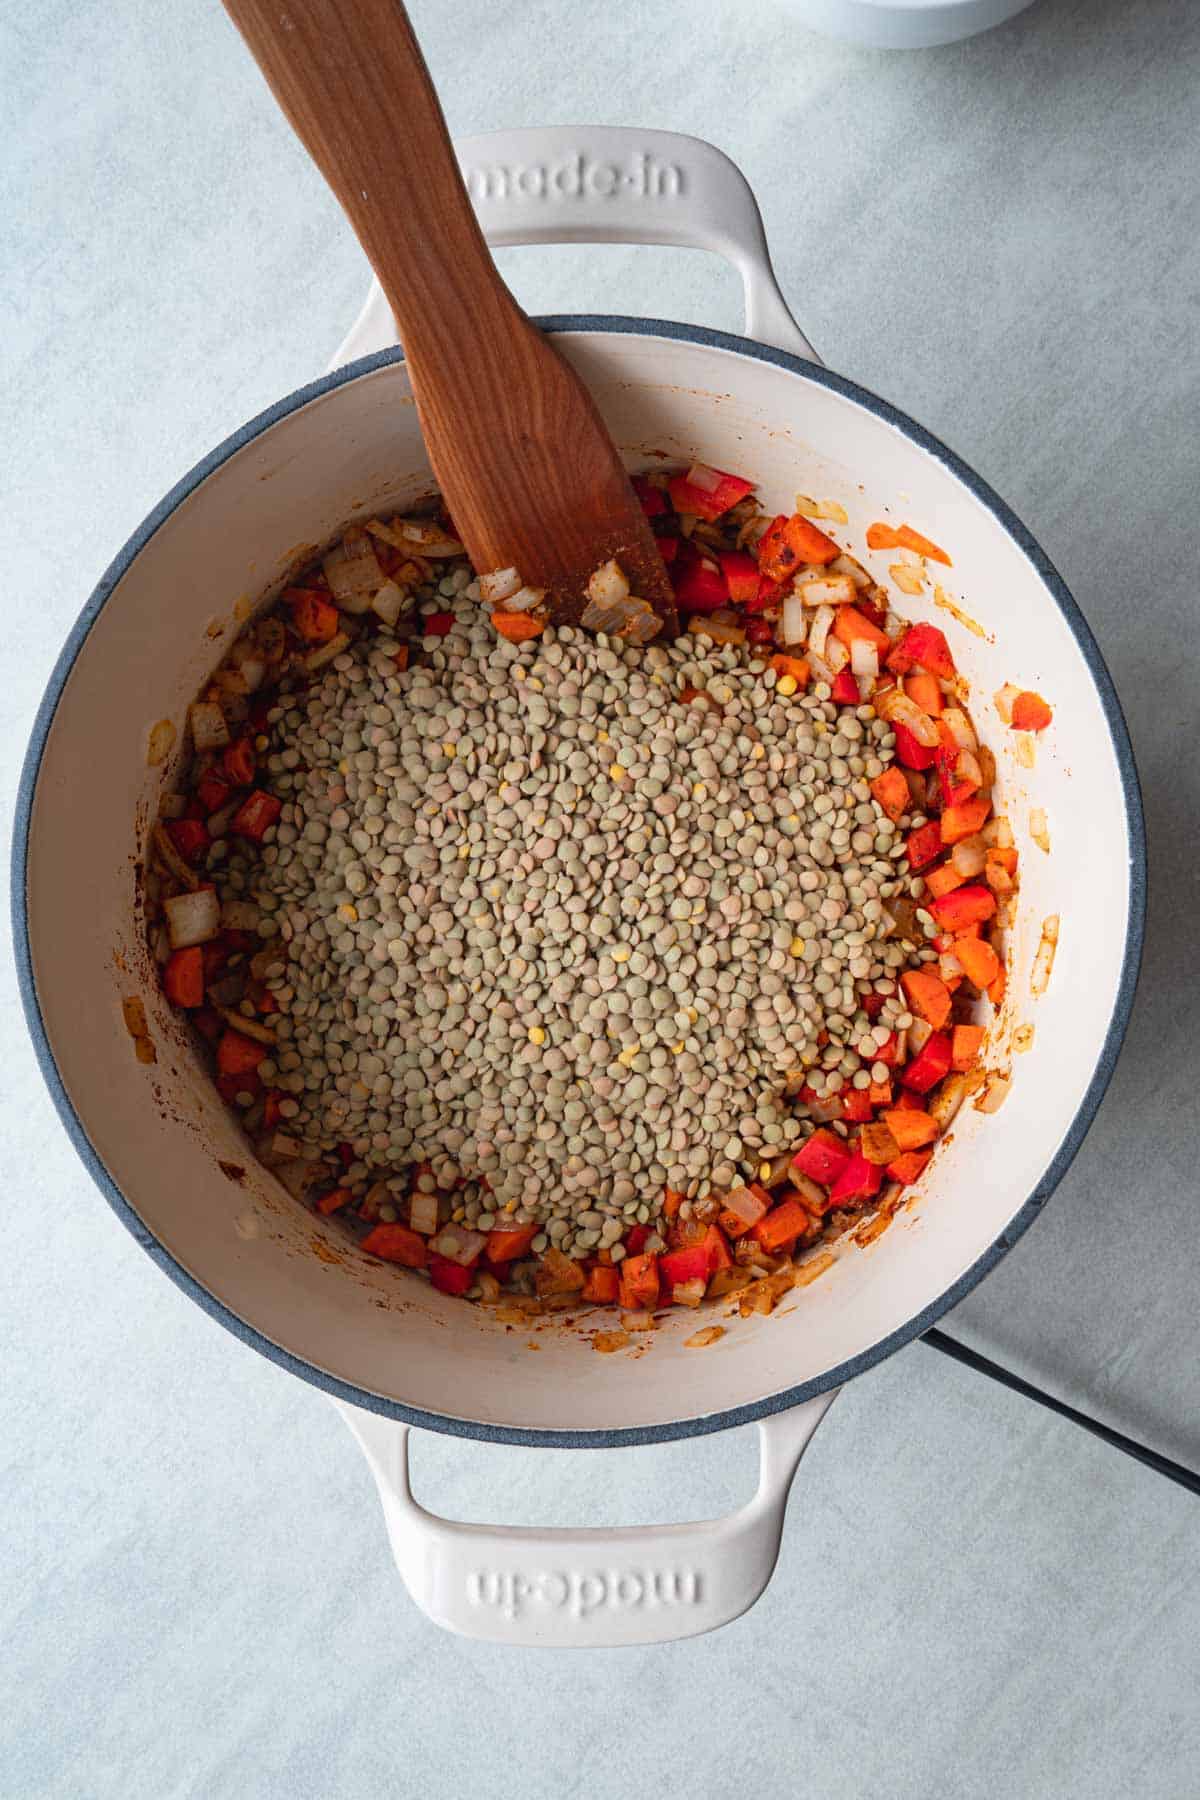 Chopped red bell pepper, carrots, onion, garlic, spices, and brown lentils cooking in a large white saucepan with a wooden spatula.